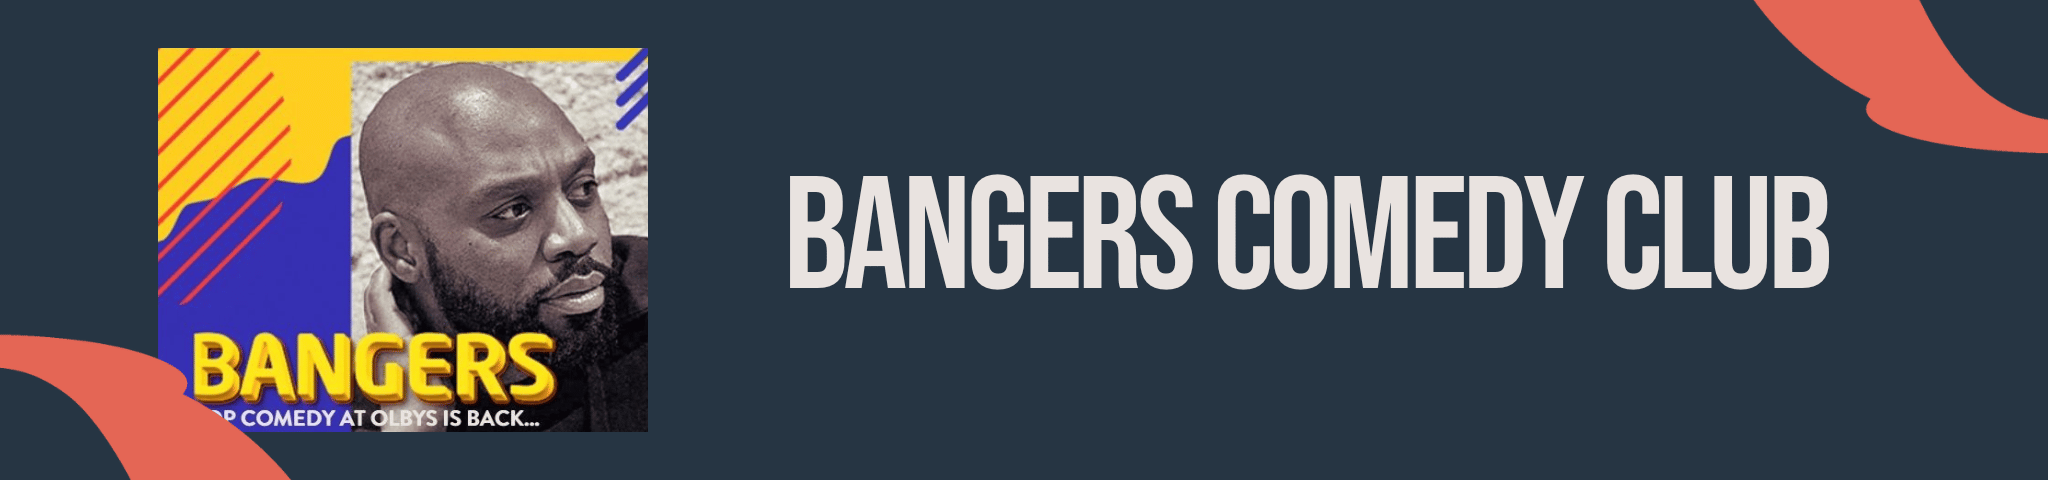 BANGERS COMEDY CLUB – CANCELLED